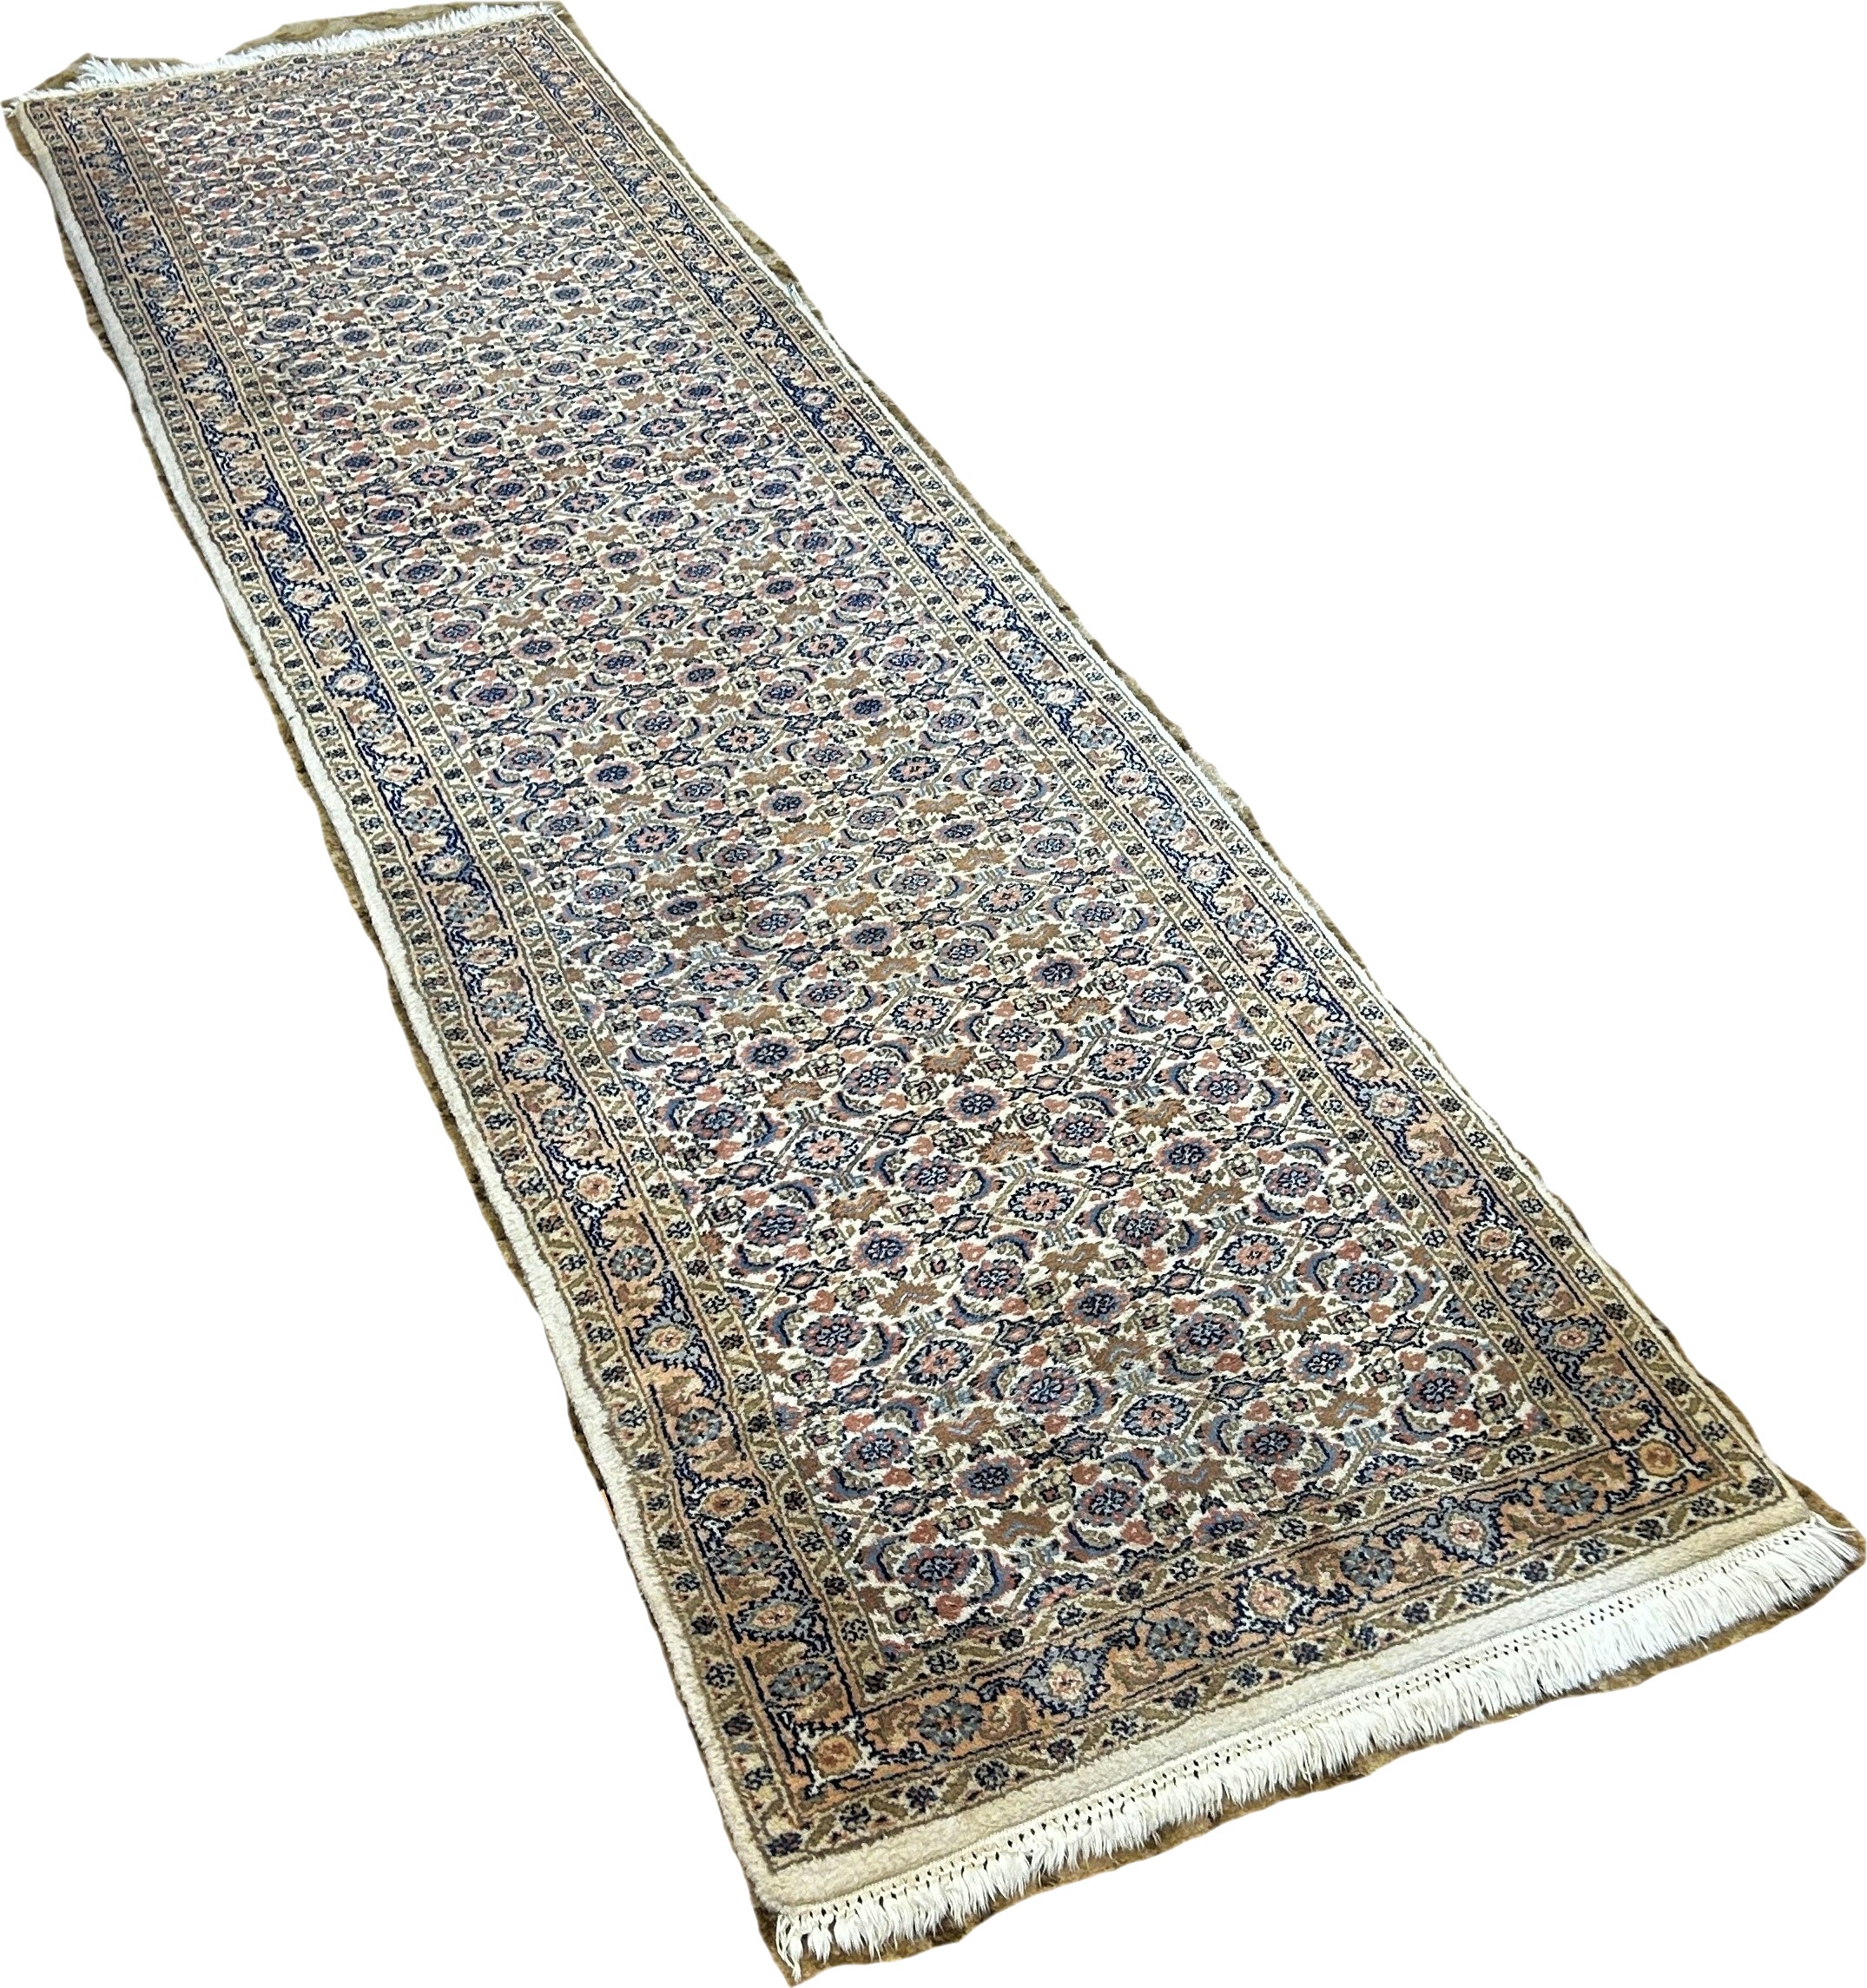 A Persian Kashan Runner with a tightly packed all over floral pattern, 315cm x 80cm approximately